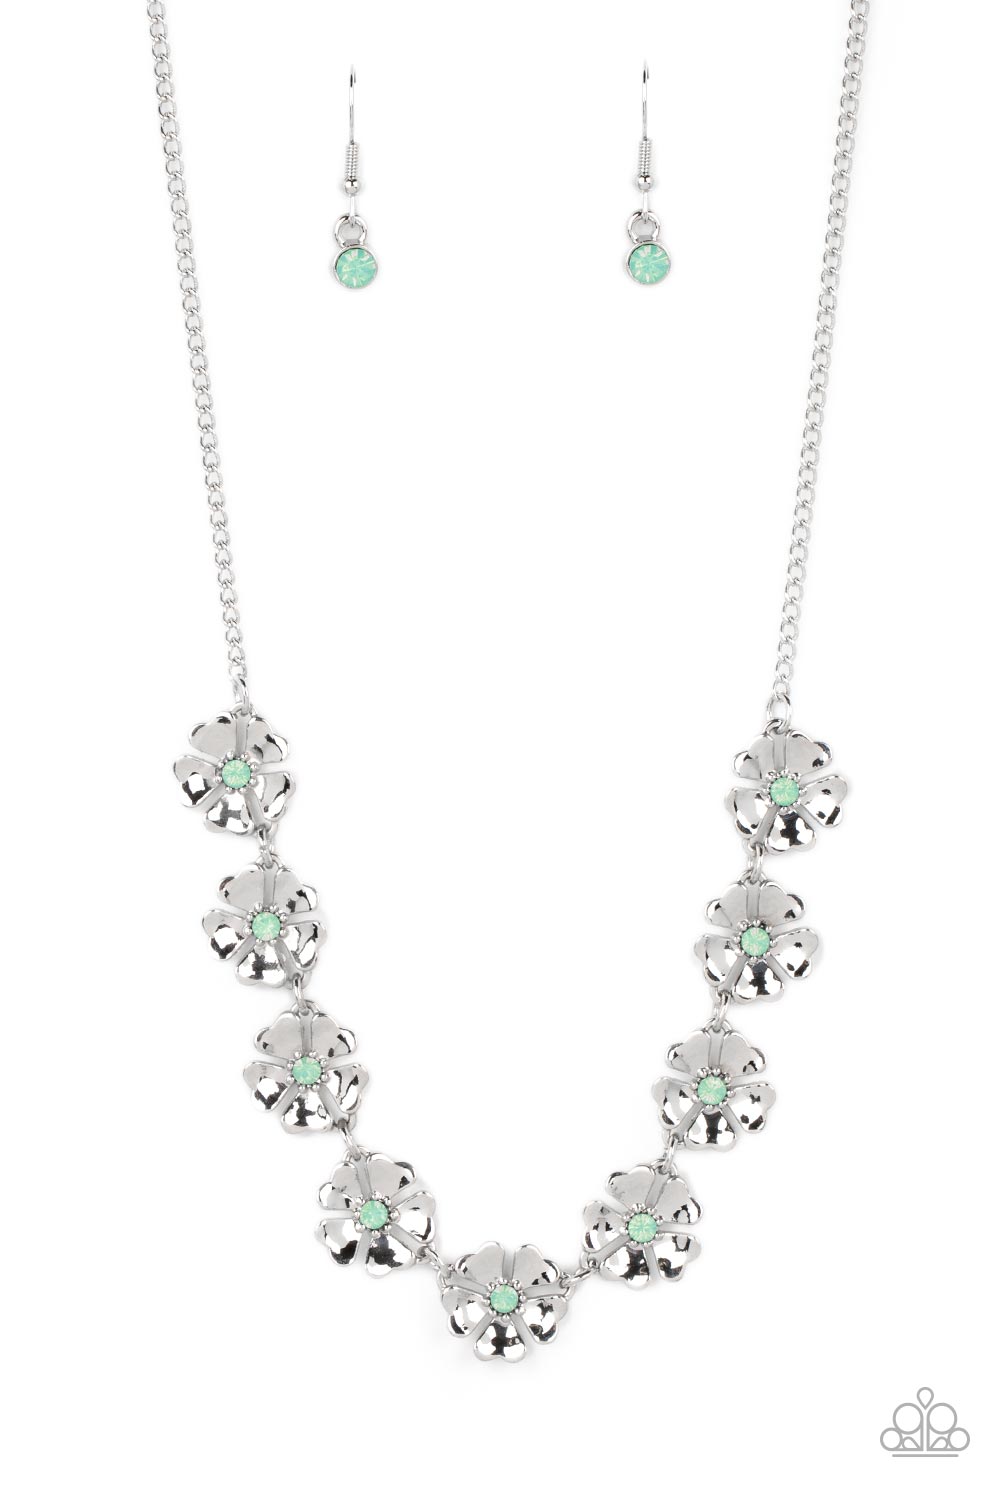 Petunia Palace Paparazzi Accessories Necklace with Earrings - Green